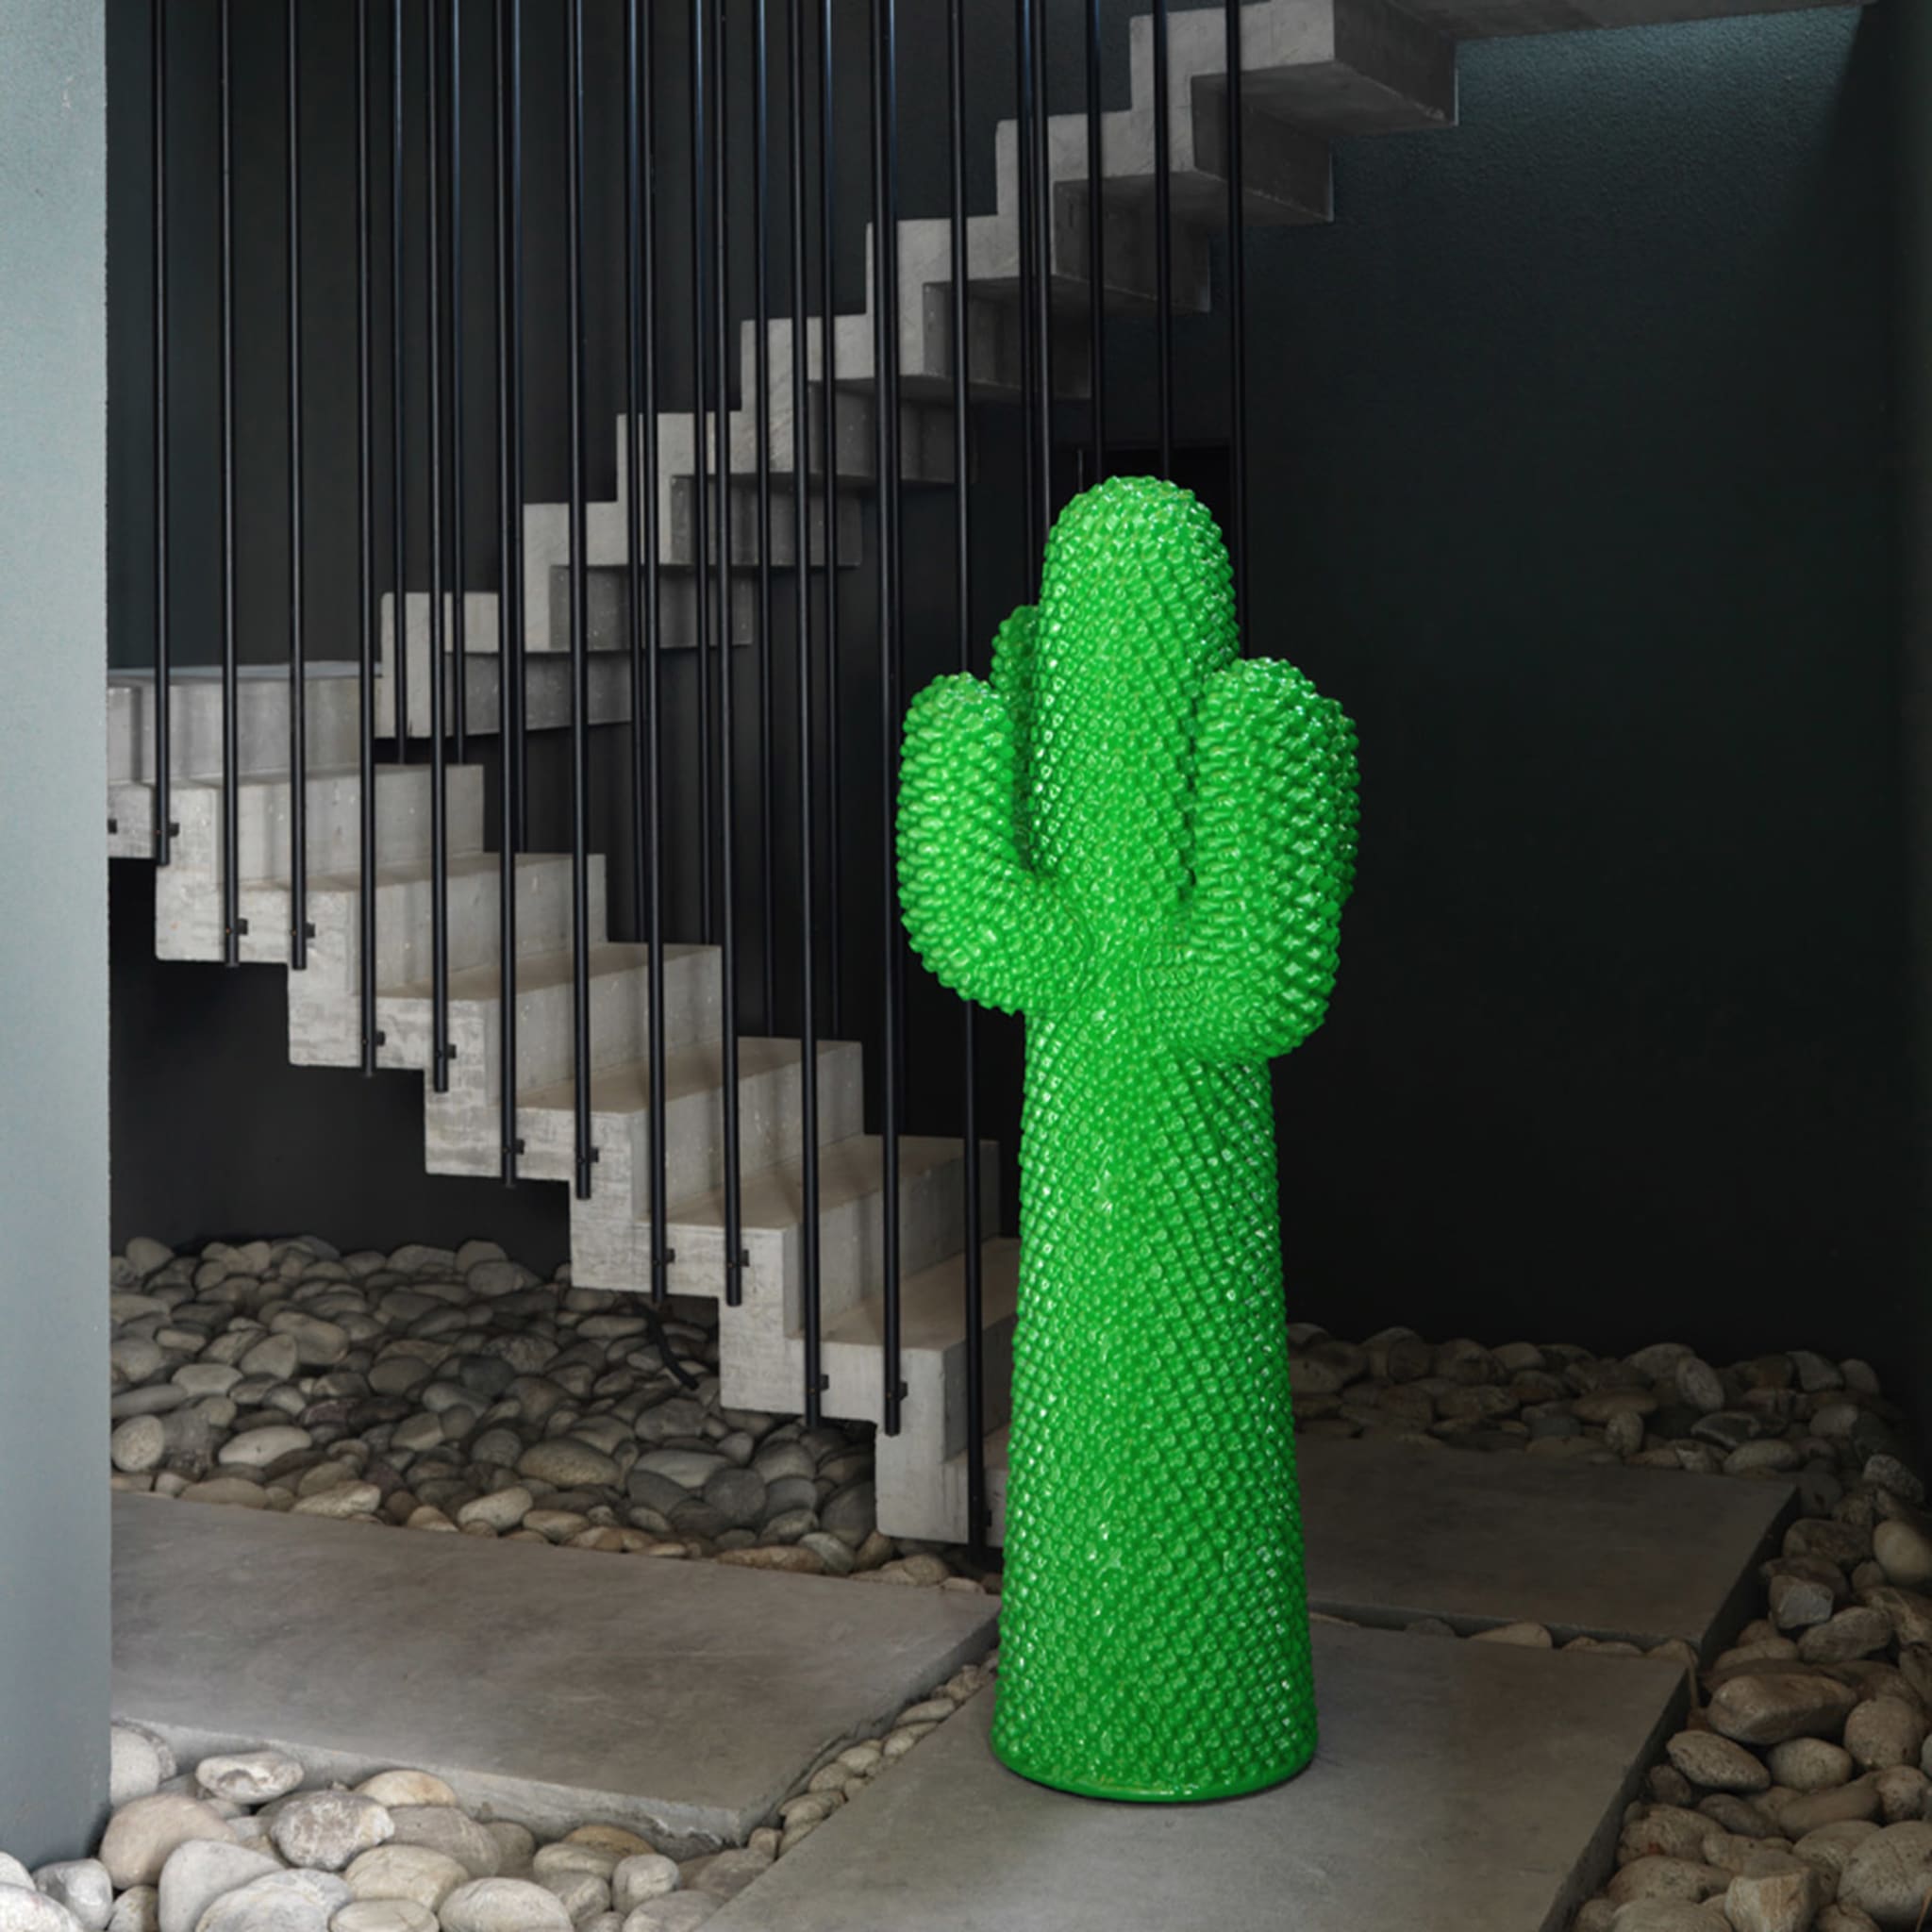 Another Green Cactus Coat Stand by Drocco/Mello - Alternative view 2